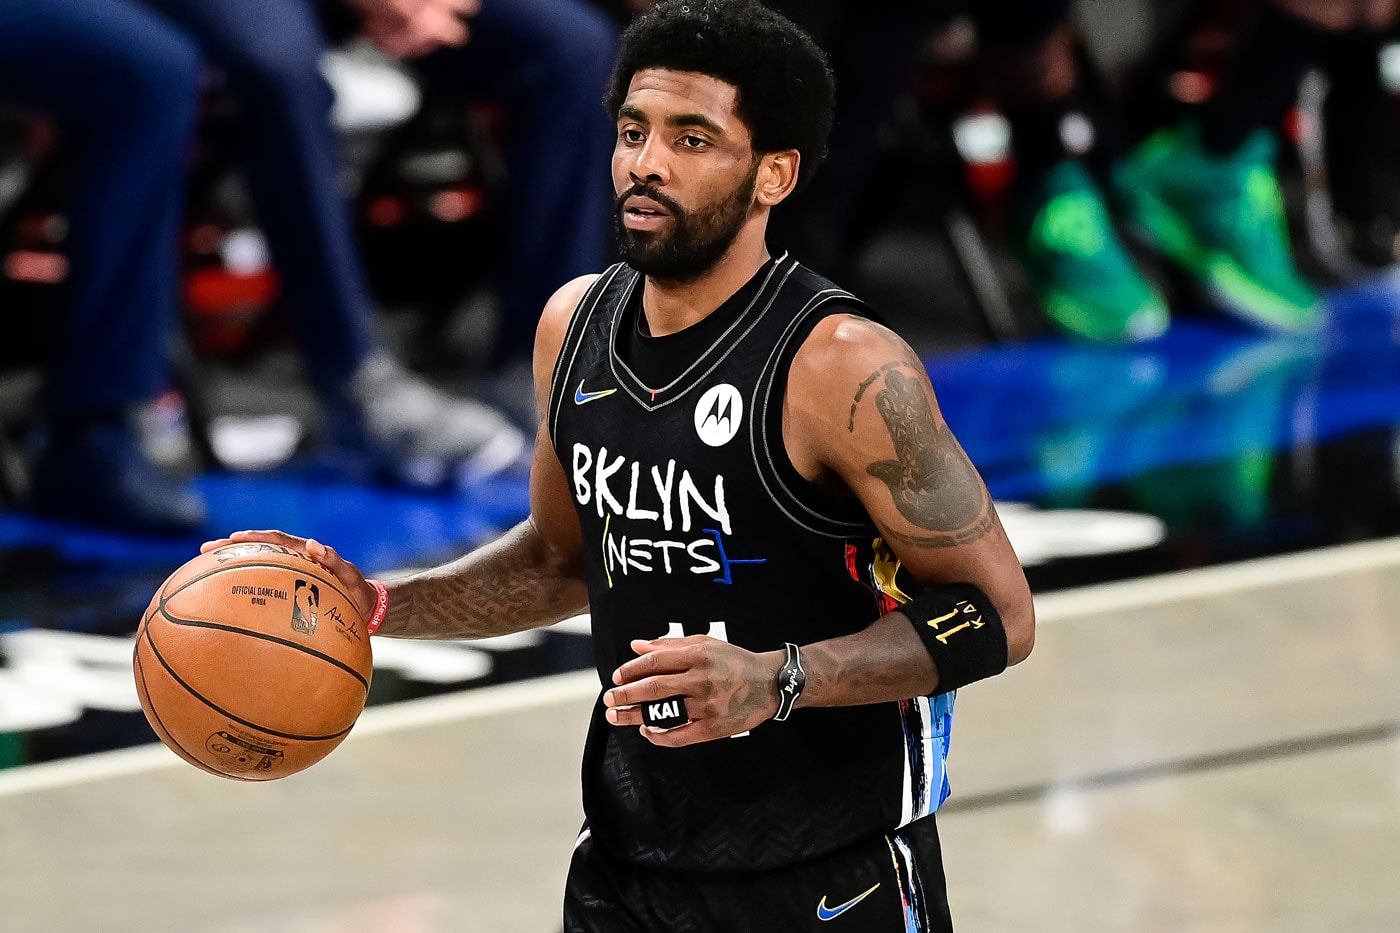 Brooklyn Nets Kyrie Irving Could Possibly Make a One-Game Return to the 2022 NBA All-Stars cleveland new york city covid-19 basketball rocket mortgage fieldhouse